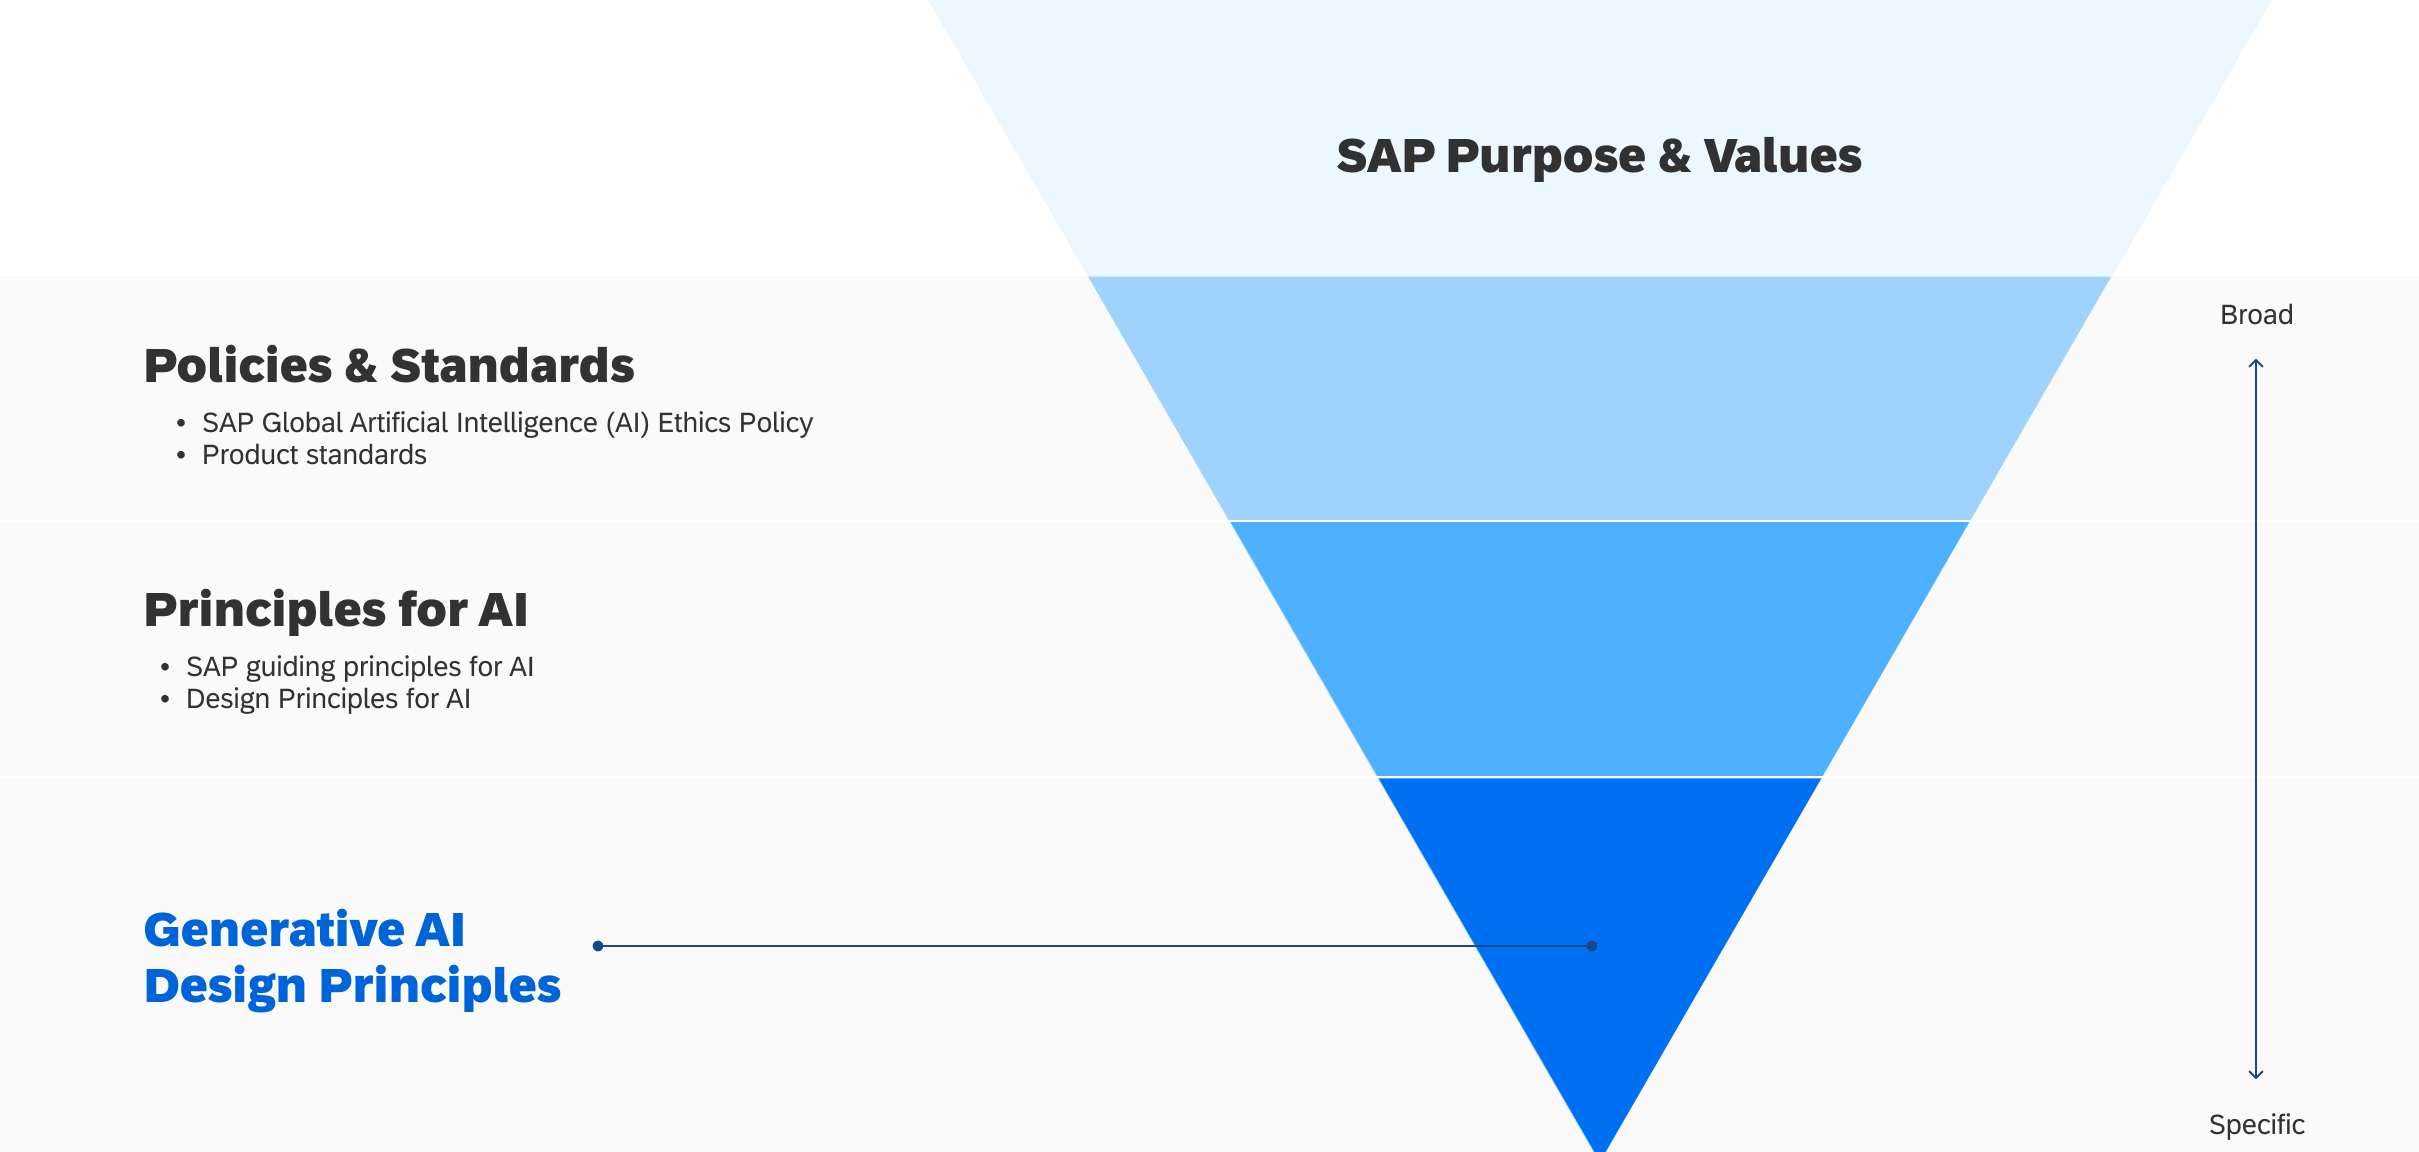 How generative AI design principles are tied to SAP's overall purpose, AI policies, standards, and generic principles.